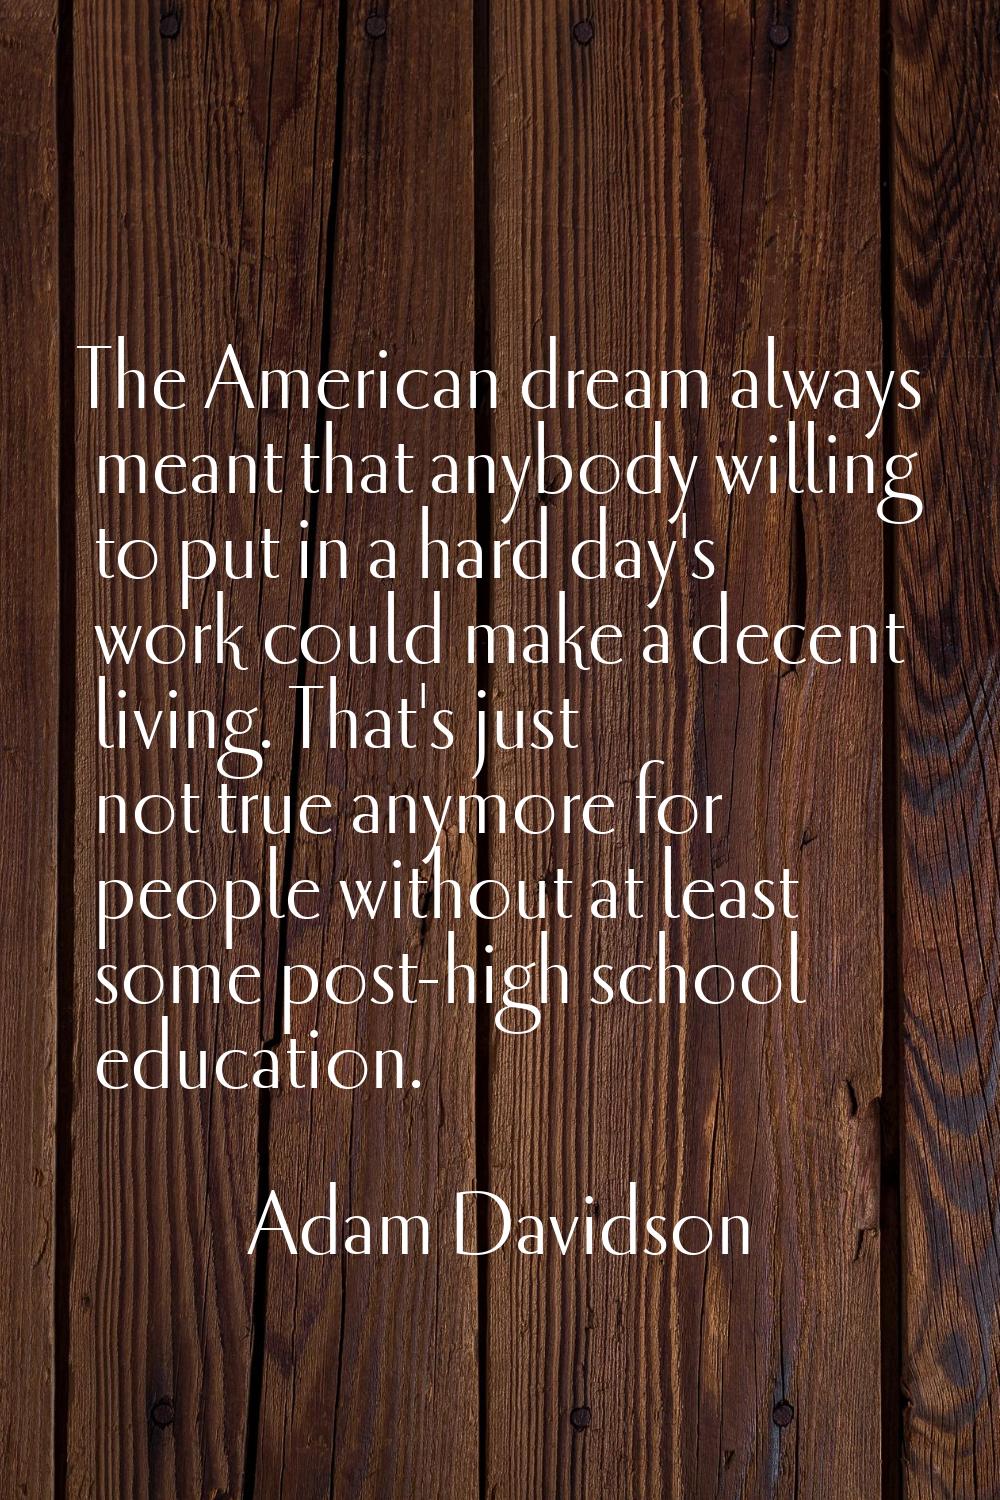 The American dream always meant that anybody willing to put in a hard day's work could make a decen